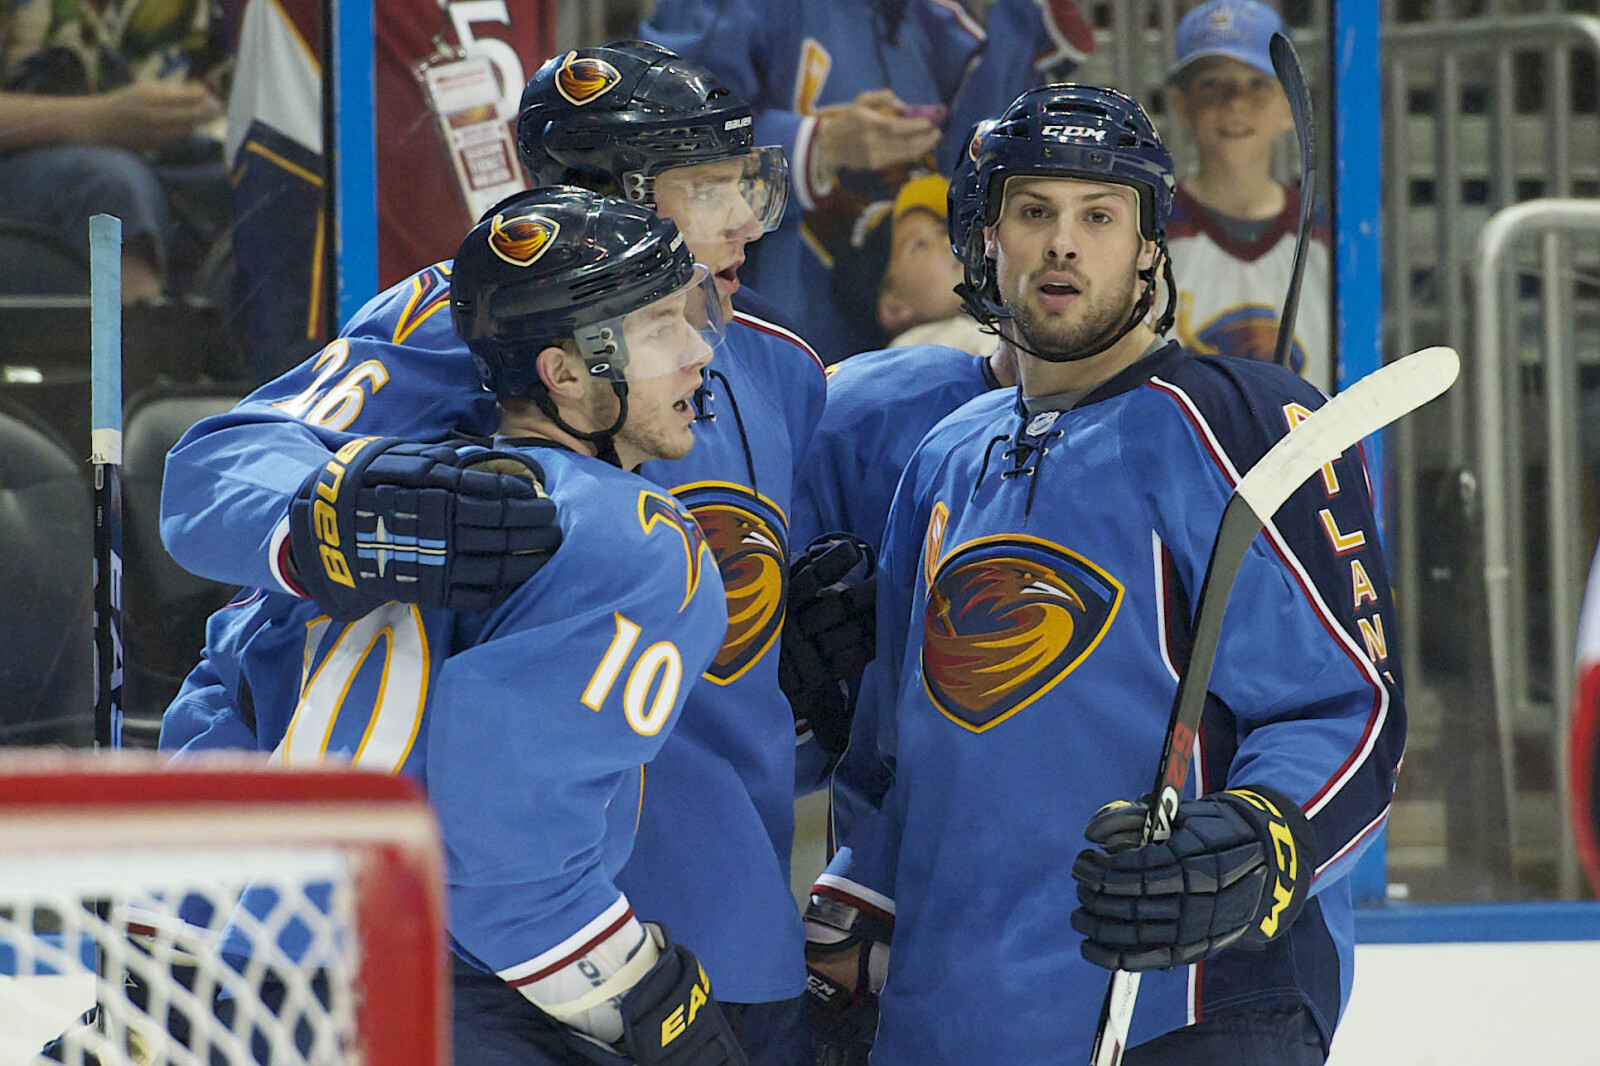 It appears the NHL actually does still own the Atlanta Thrashers